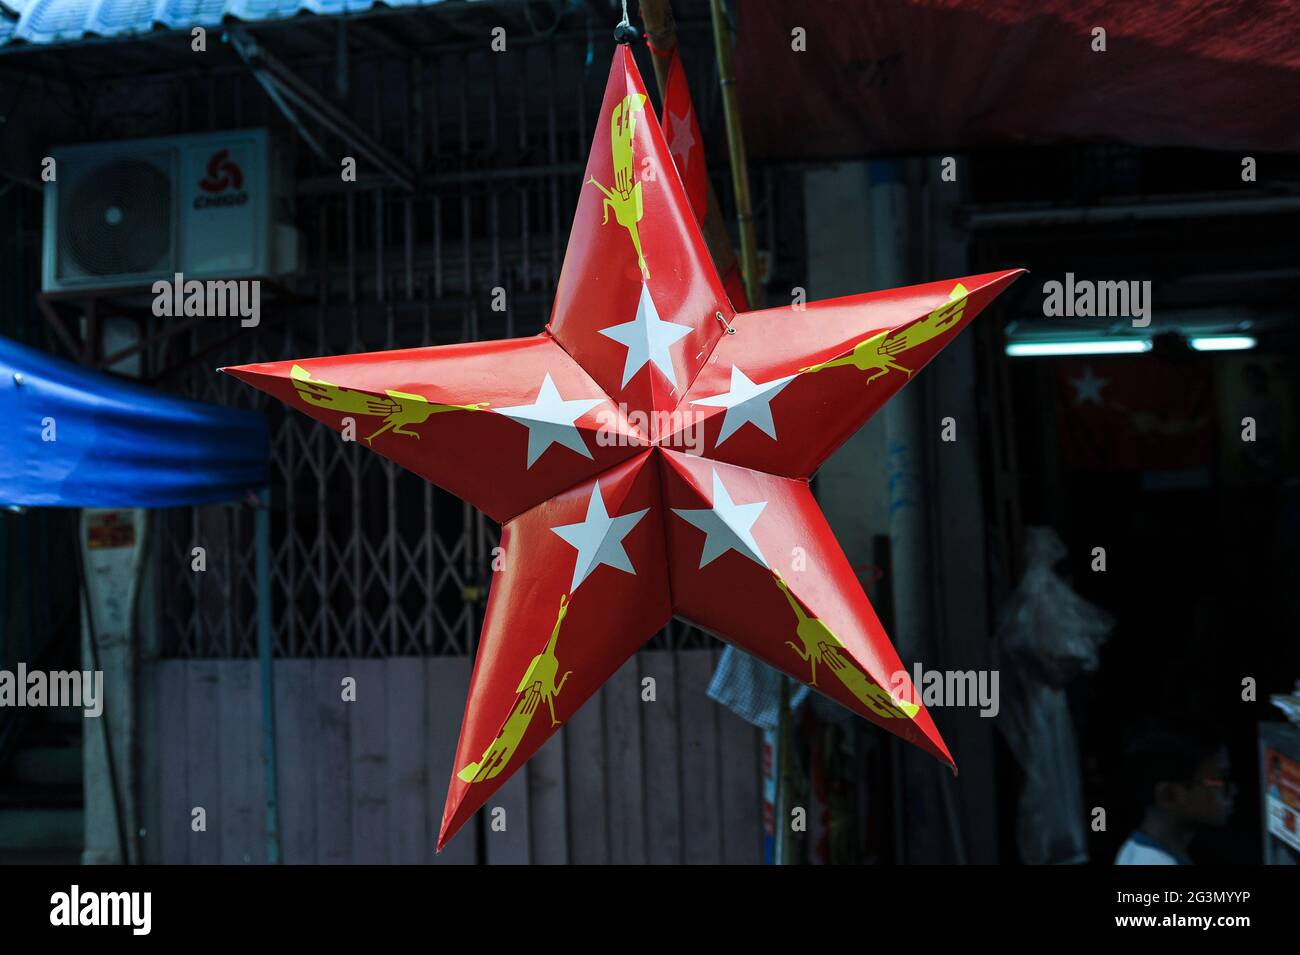 "31.10.2015, Yangon, , Myanmar - A red cardboard star with the logo of the NLD (National League for Democracy) party hangs from a street stall in the Stock Photo